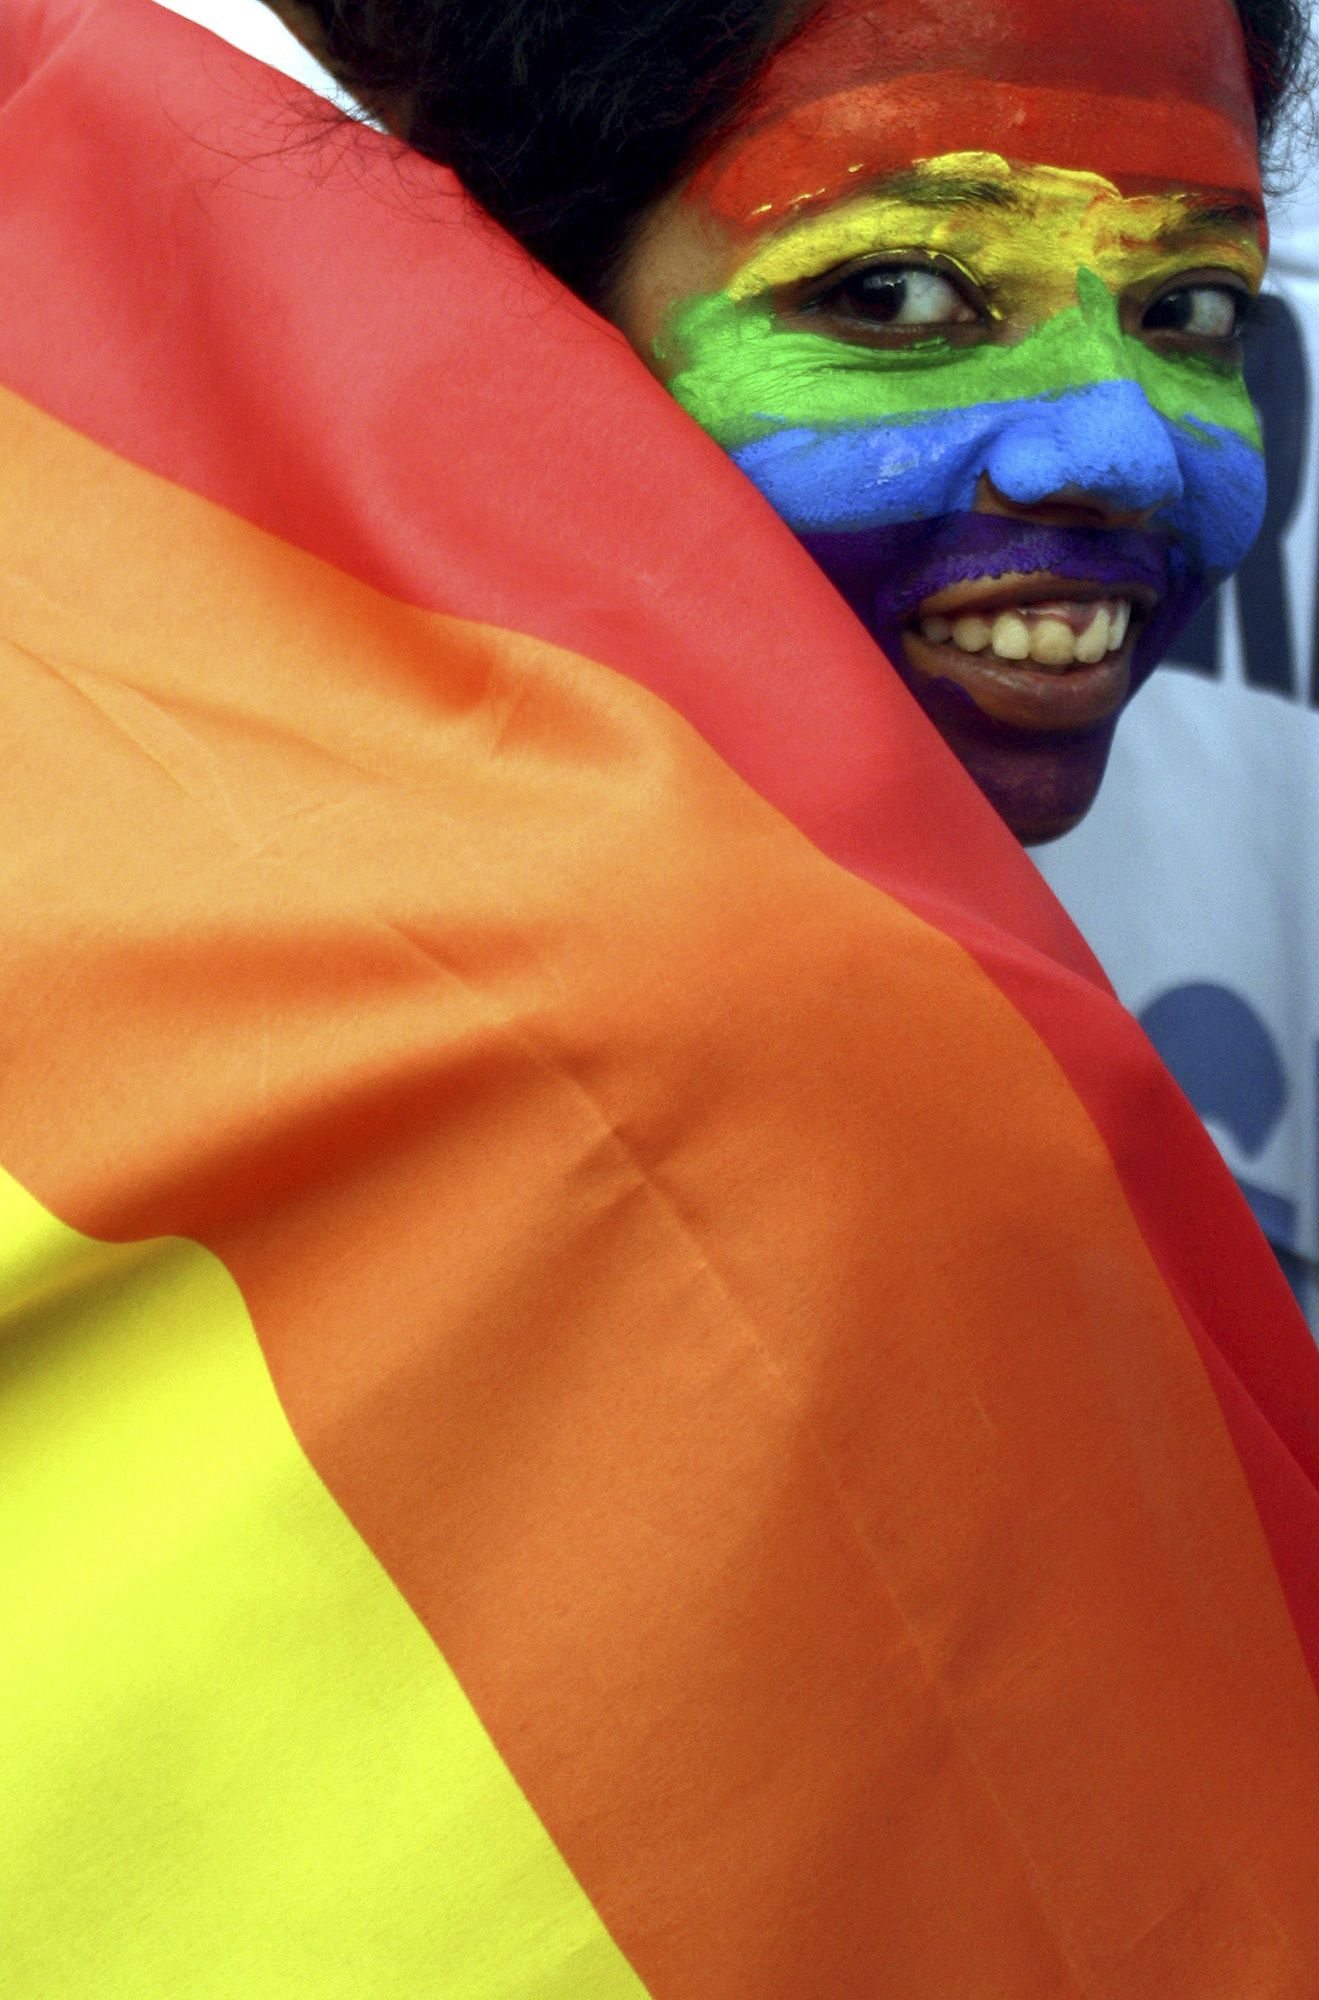 In this July 2, 2009 file photo, a gay rights activist in Calcutta, India, participates in a rally celebrating the groundbreaking ruling by the Delhi High Court decriminalizing homosexuality.